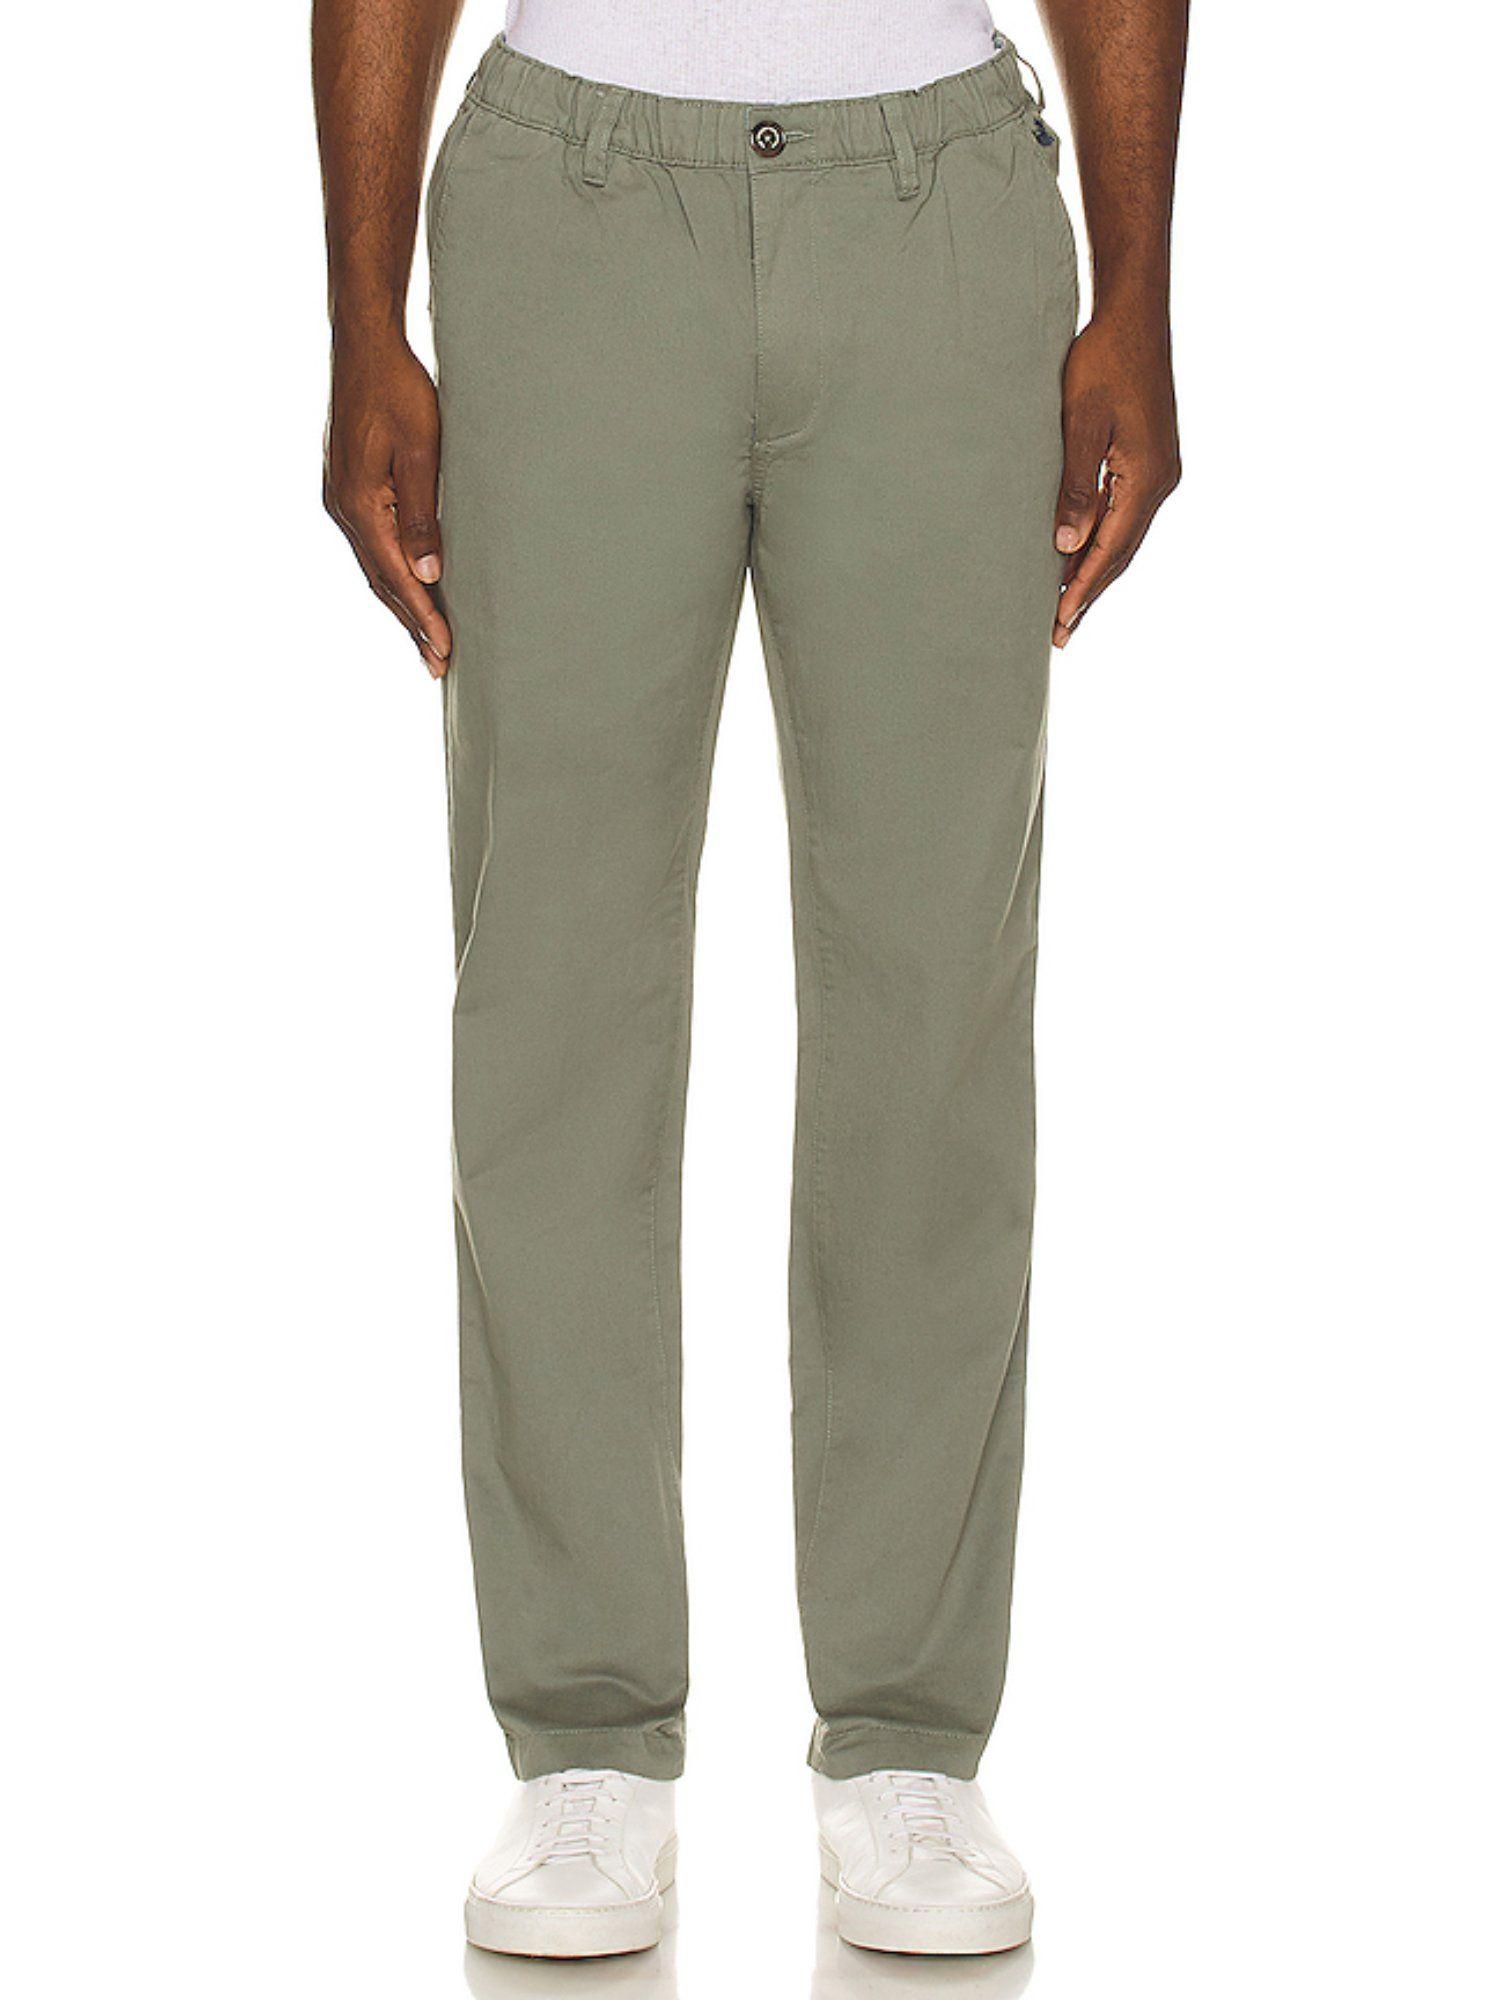 the forests originals pant